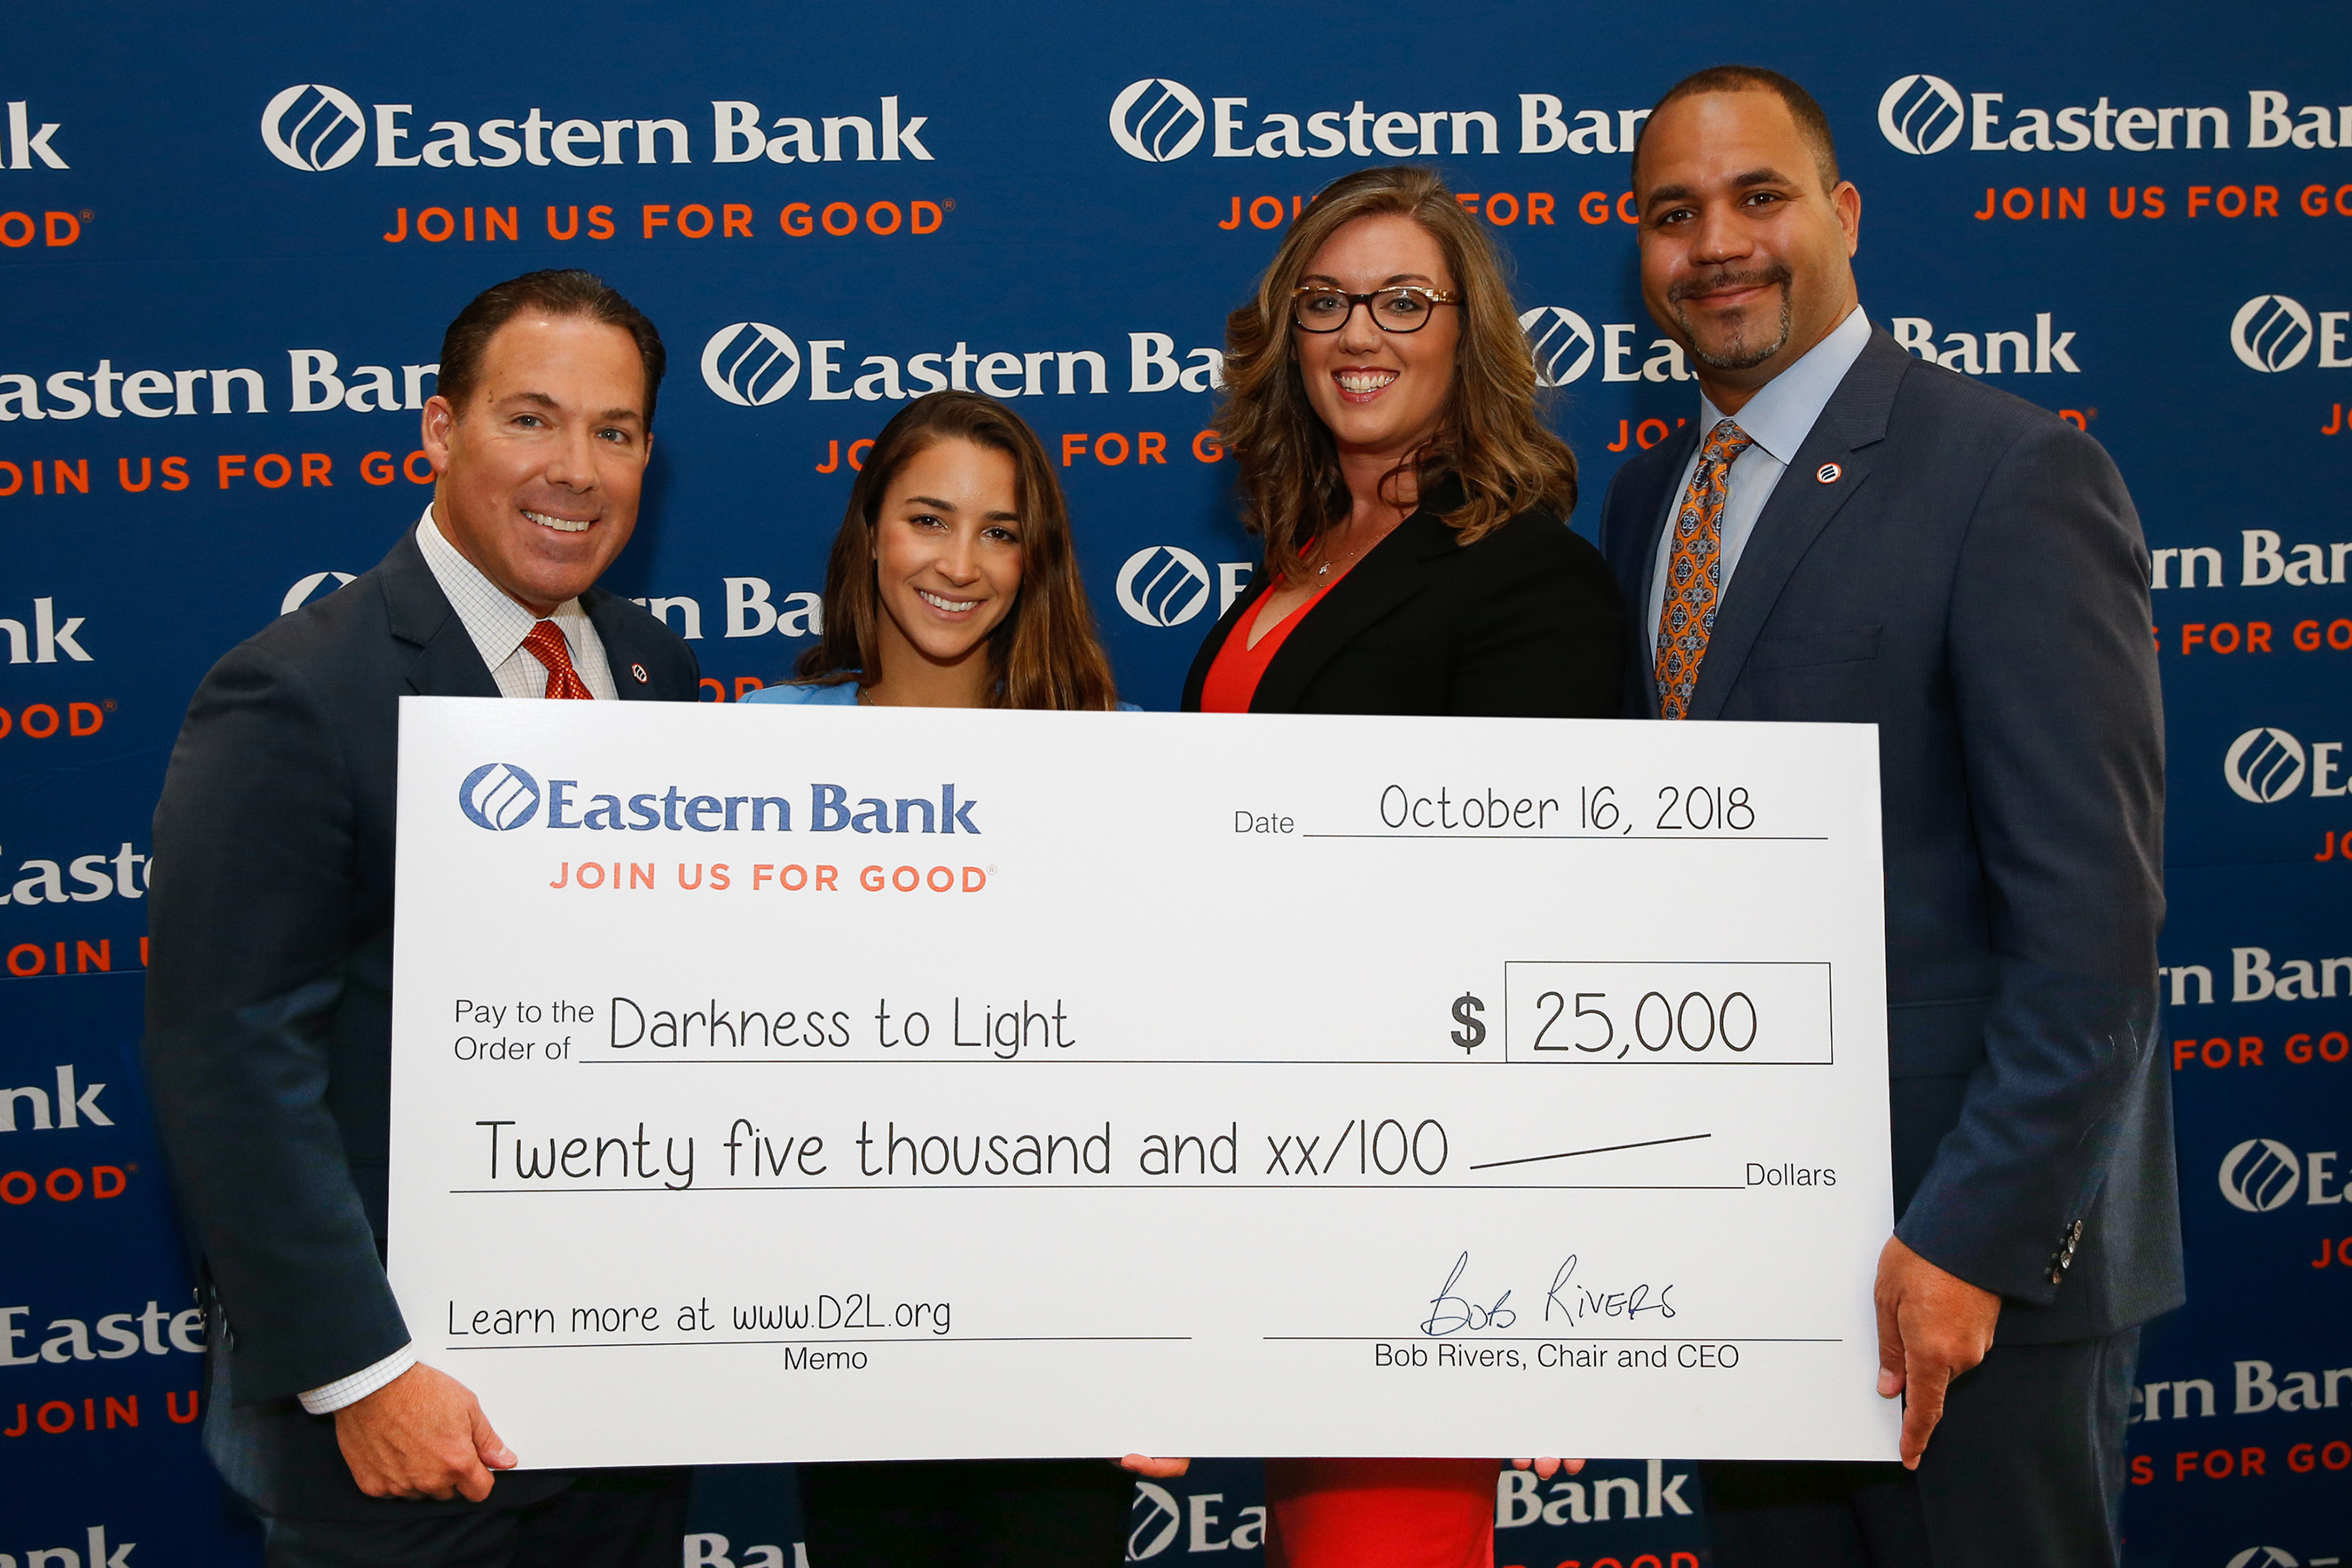 Bob Rivers (left), Chair & CEO of Eastern Bank, and Quincy Miller (right), Vice Chair & President of Eastern Bank, present Aly Raisman and Katelyn Brewer with a donation for $25,000 to Darkness to Light.